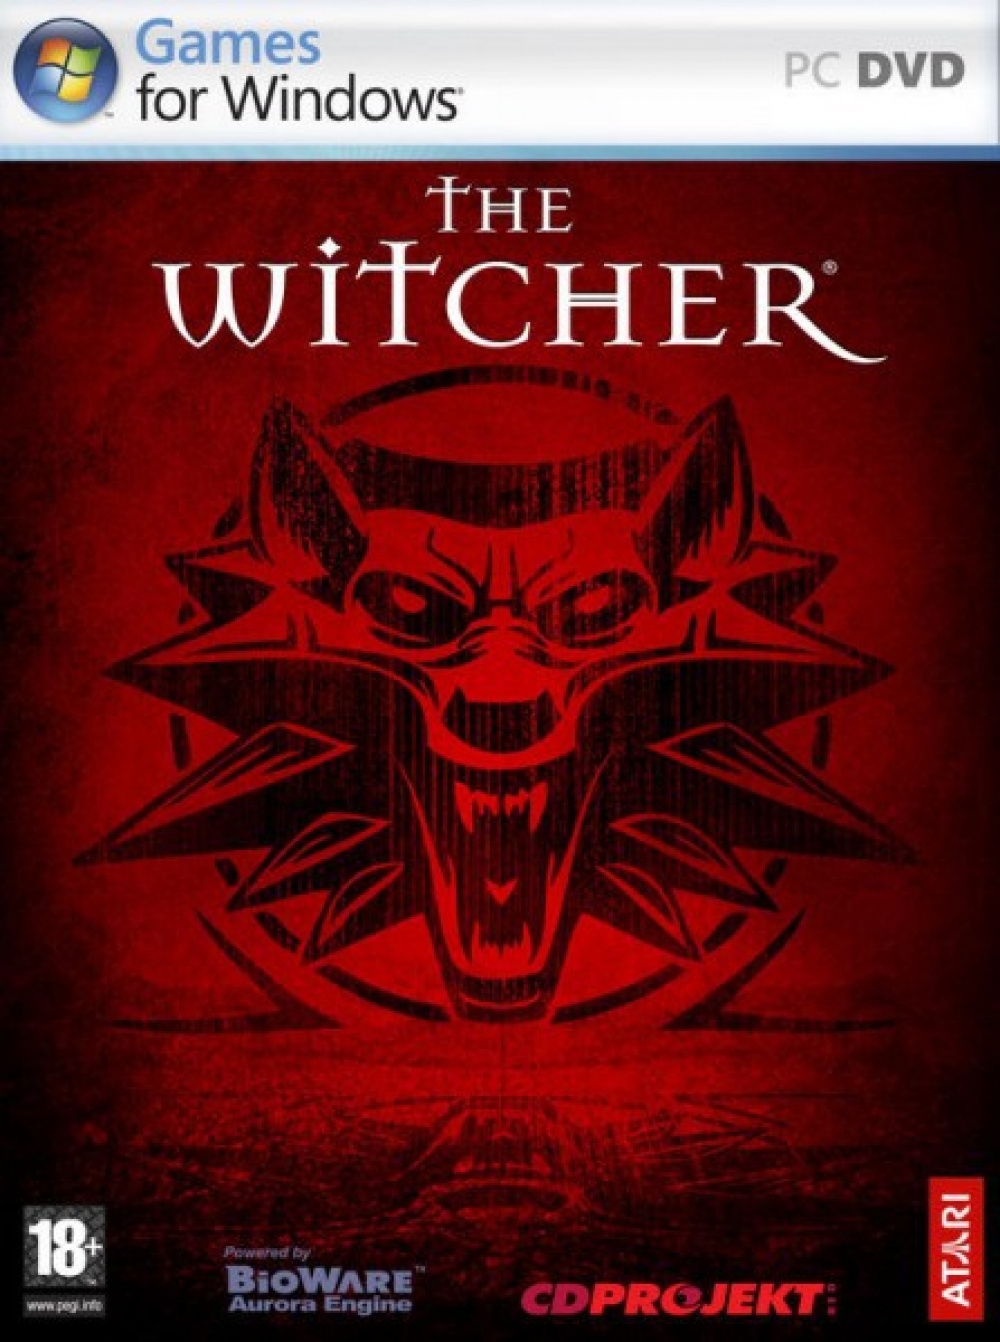 The Witcher  Video Game Reviews and Previews PC, PS4, Xbox One and mobile